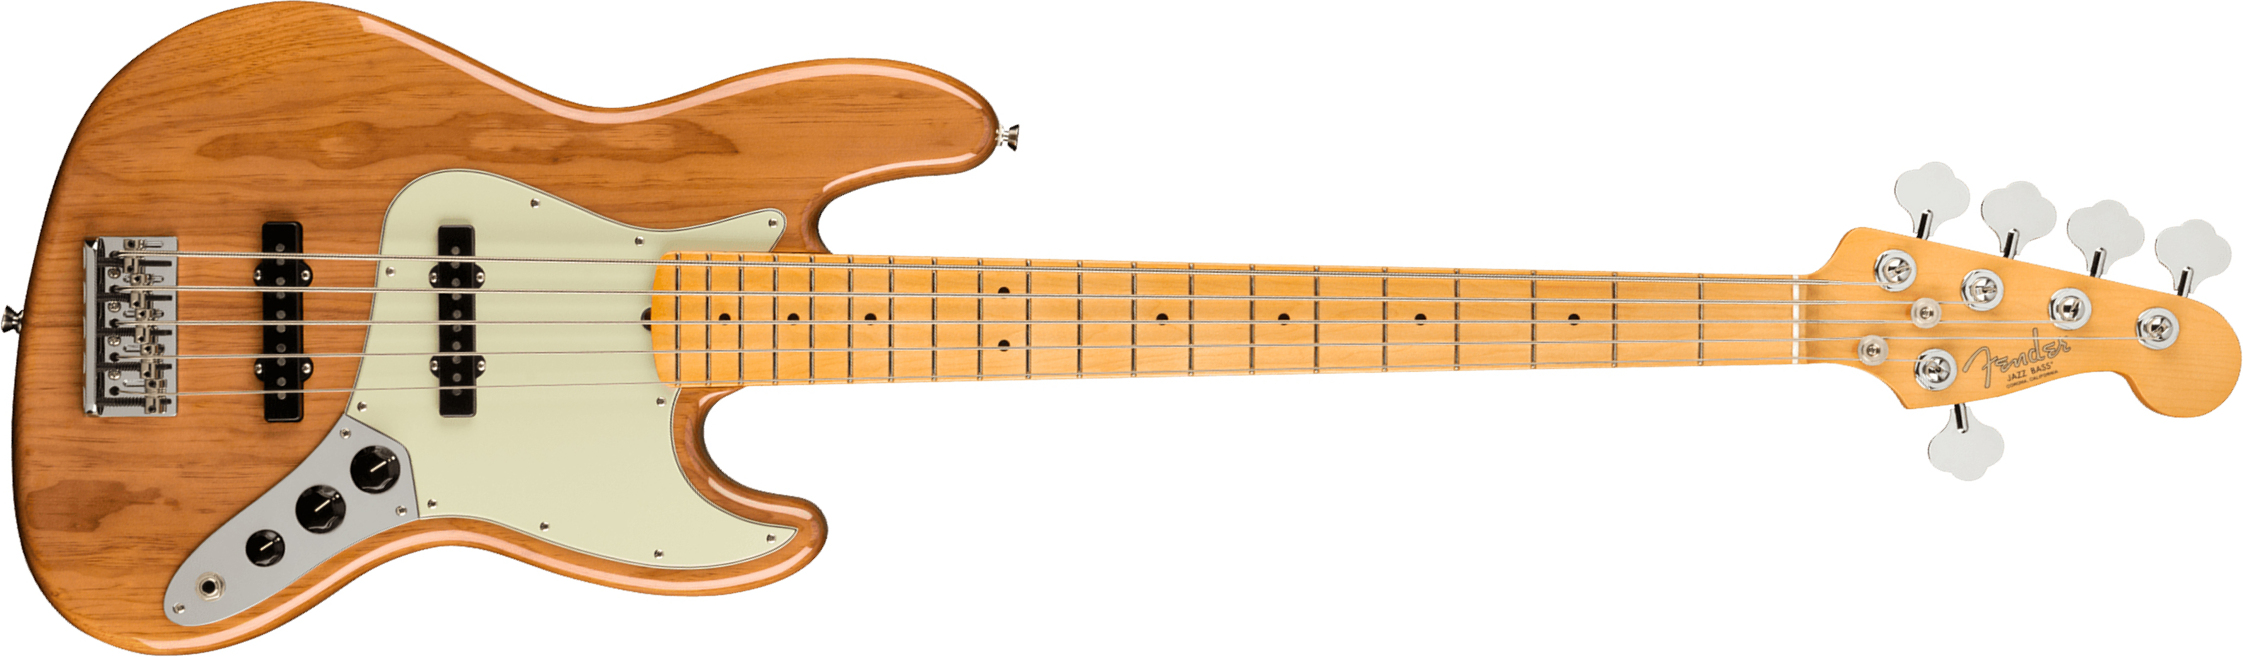 Fender Jazz Bass V American Professional Ii Usa 5-cordes Mn - Roasted Pine - Solid body elektrische bas - Main picture